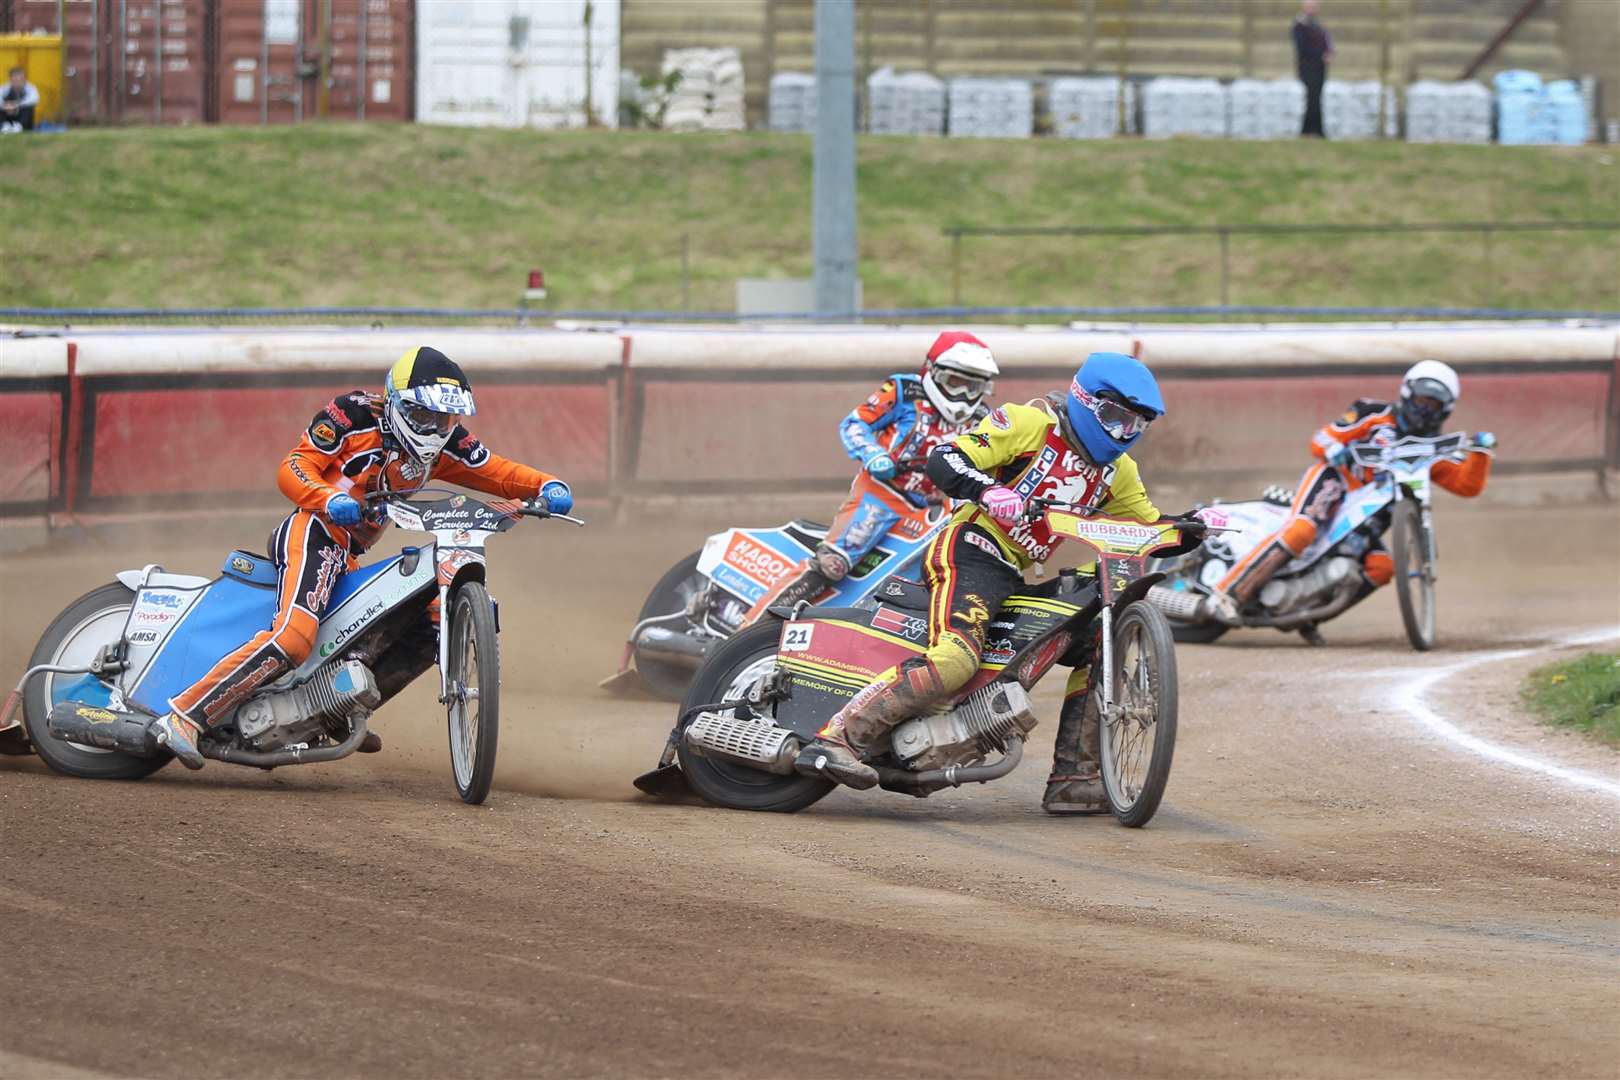 Kent Kings speedway team race at Central Park in Sittingbourne